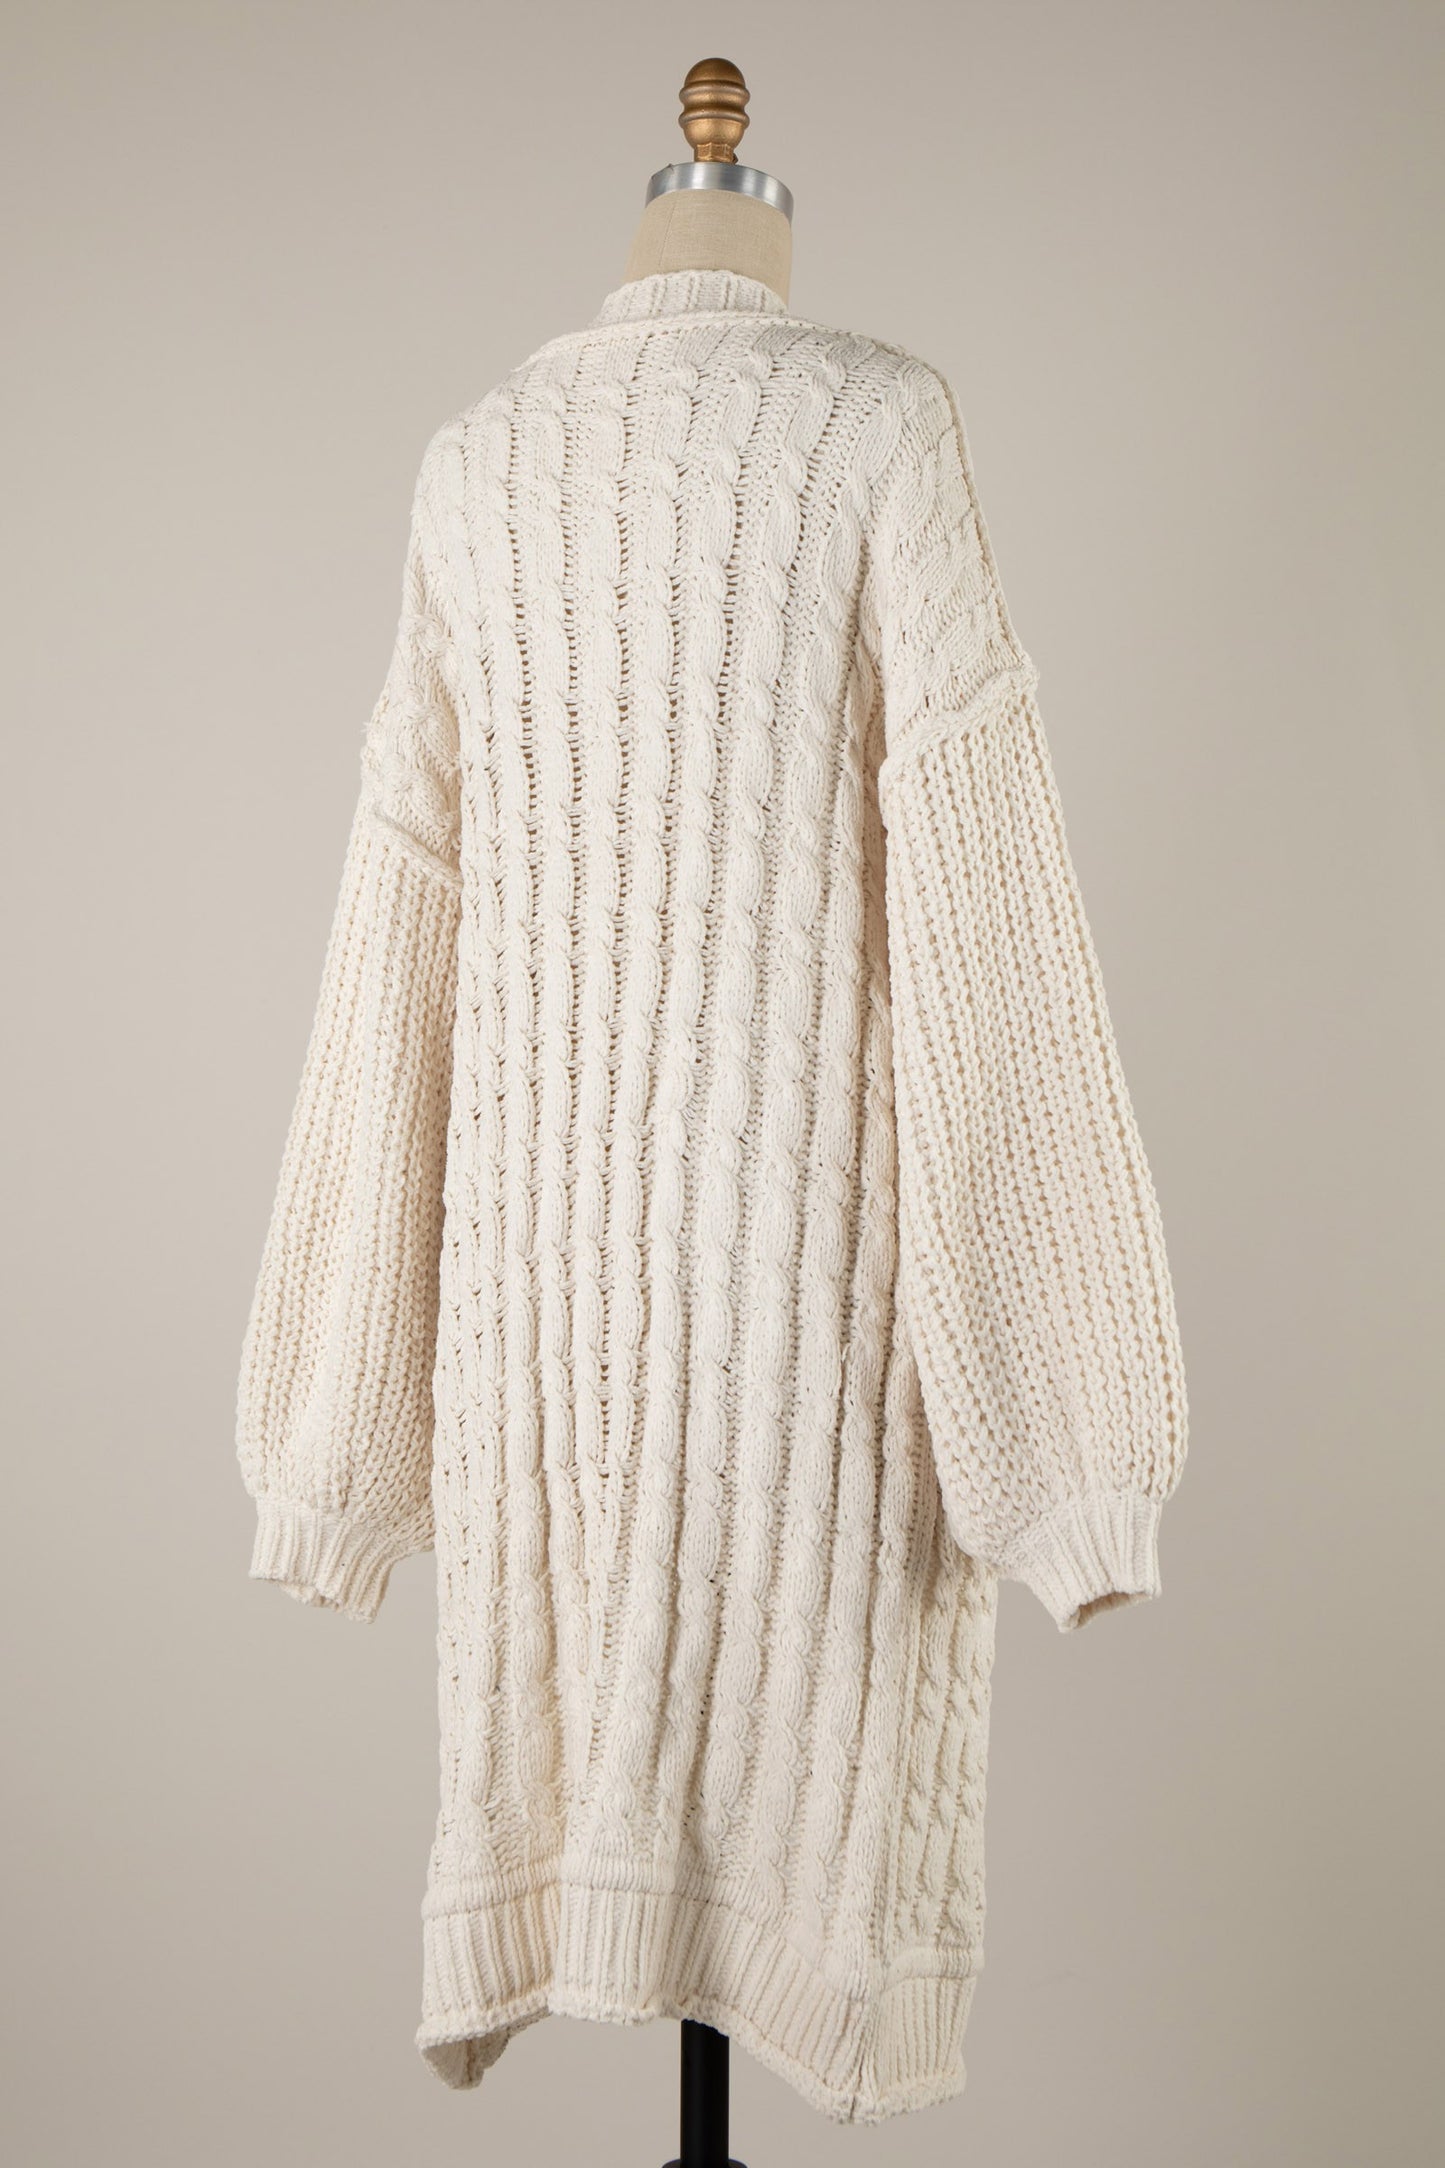 Chunky Braid Knit Chenille Cable Knit Cardigan